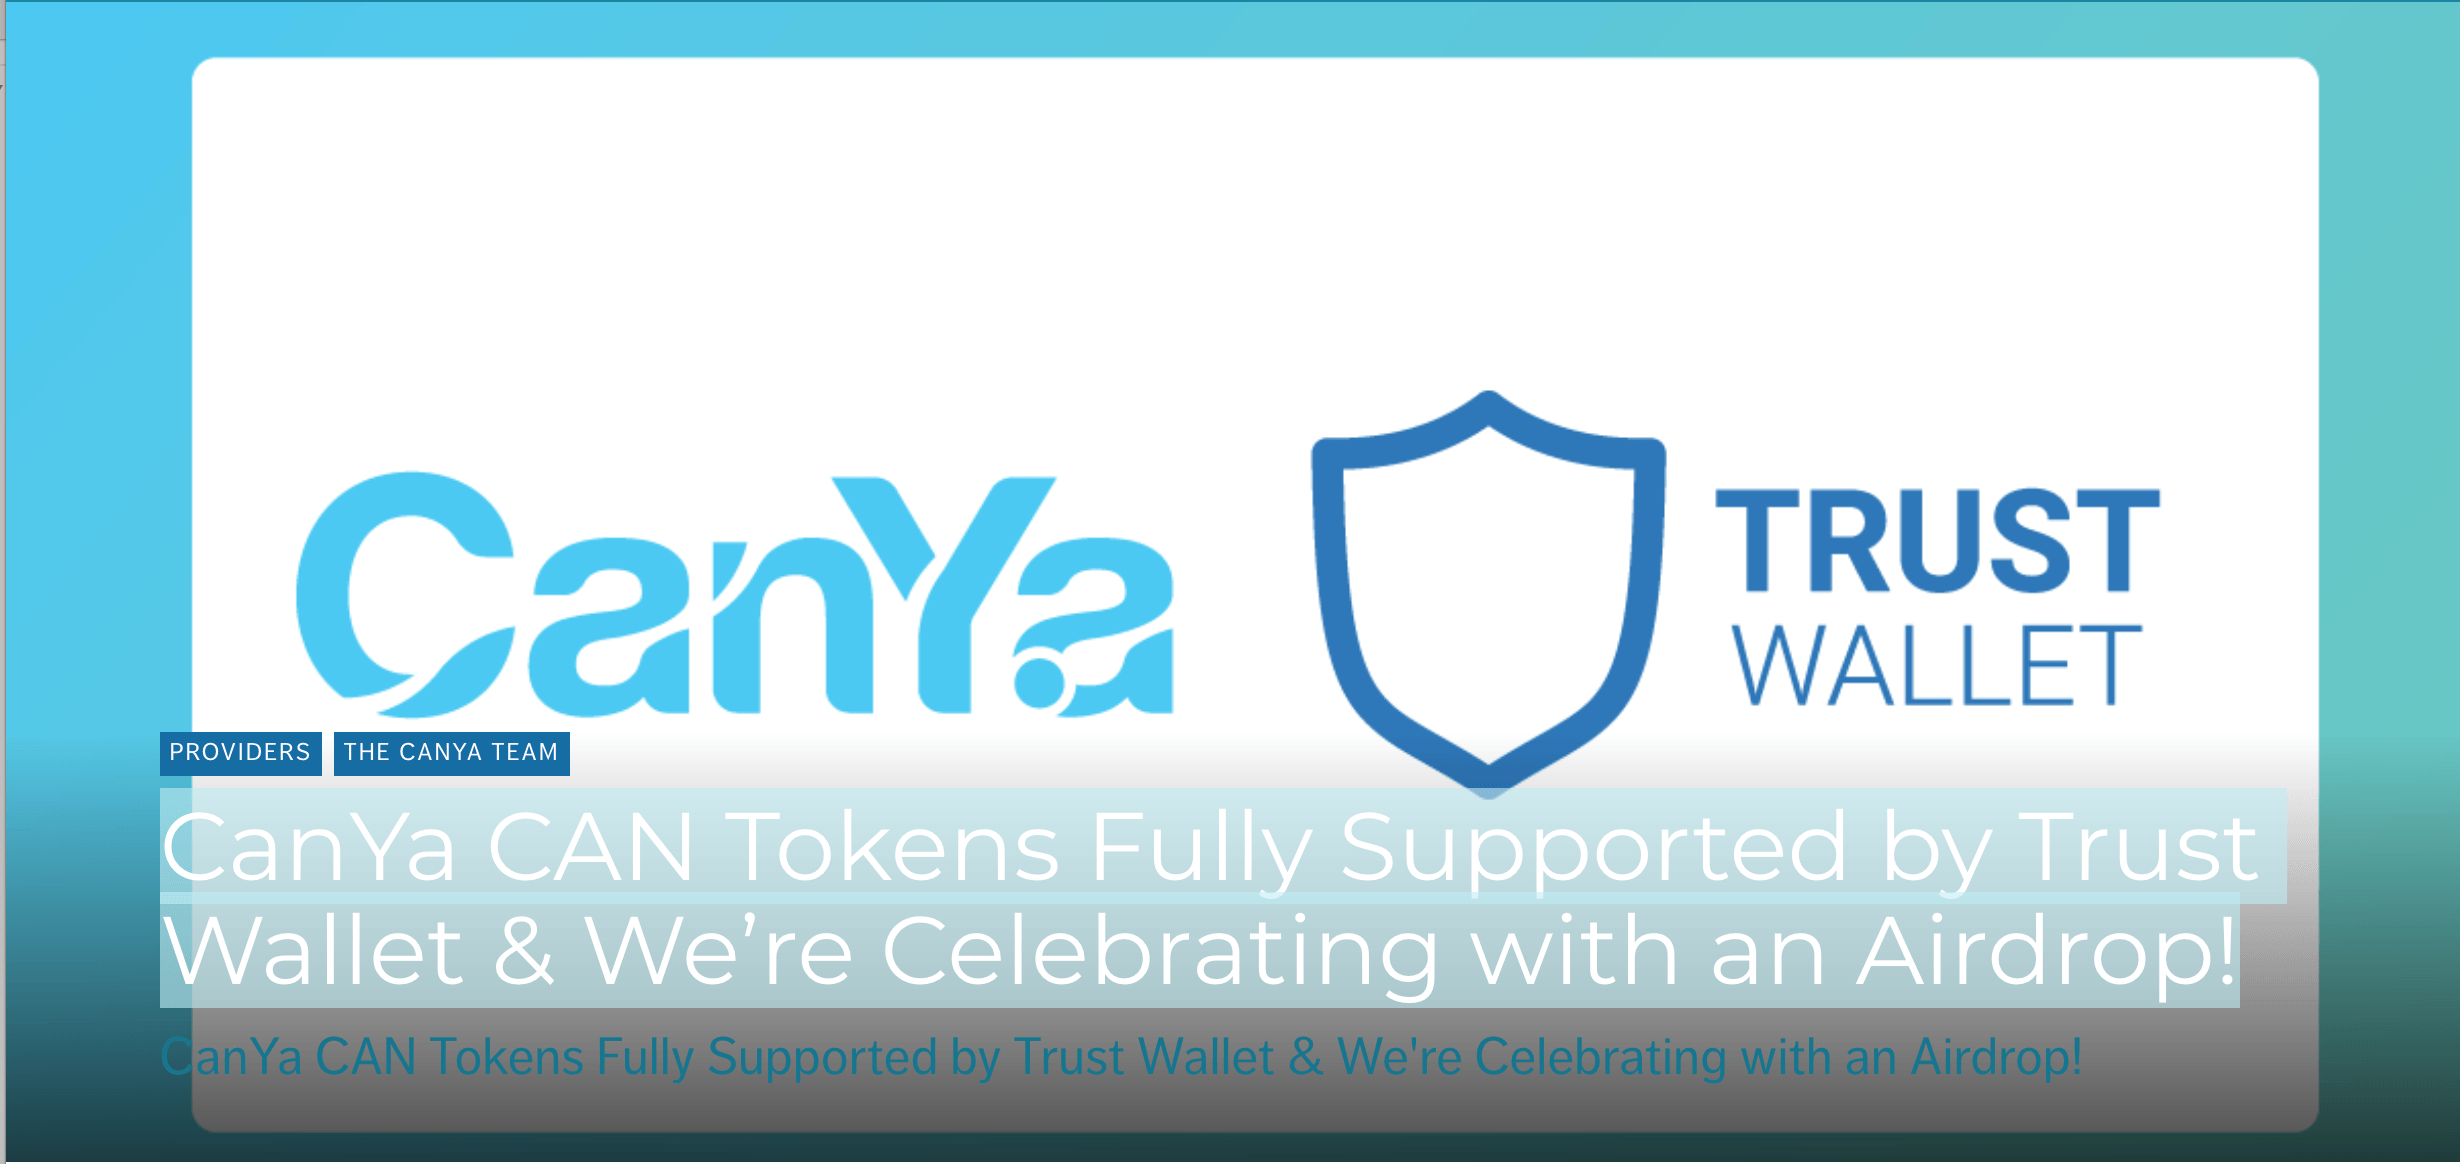 QQ Wallet Logo - CanYa CAN Tokens Fully Supported by Trust Wallet & We're Celebrating ...